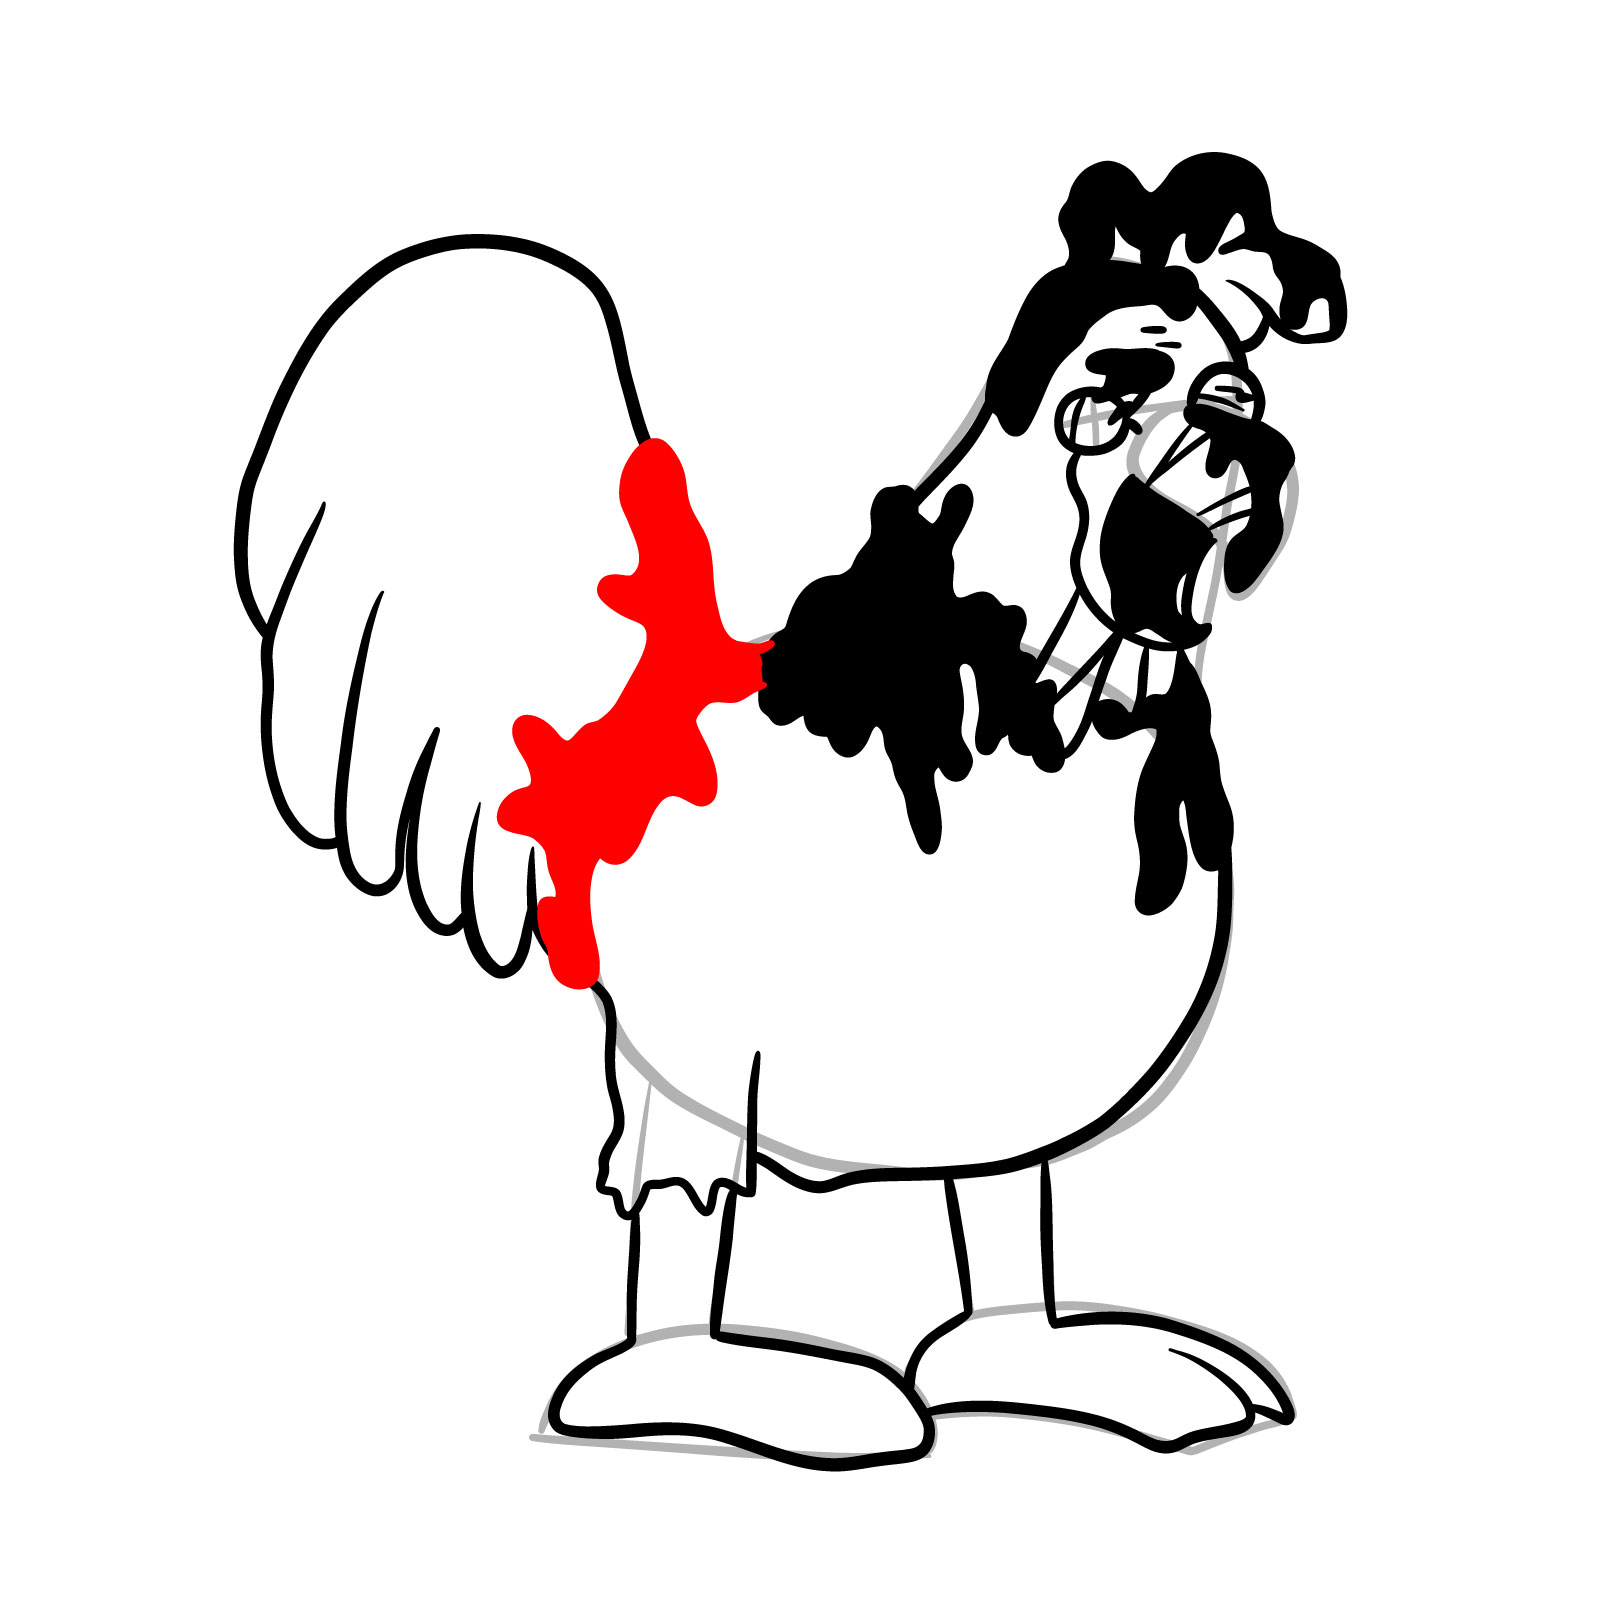 How to draw Corrupted Ernie the Chicken - step 21